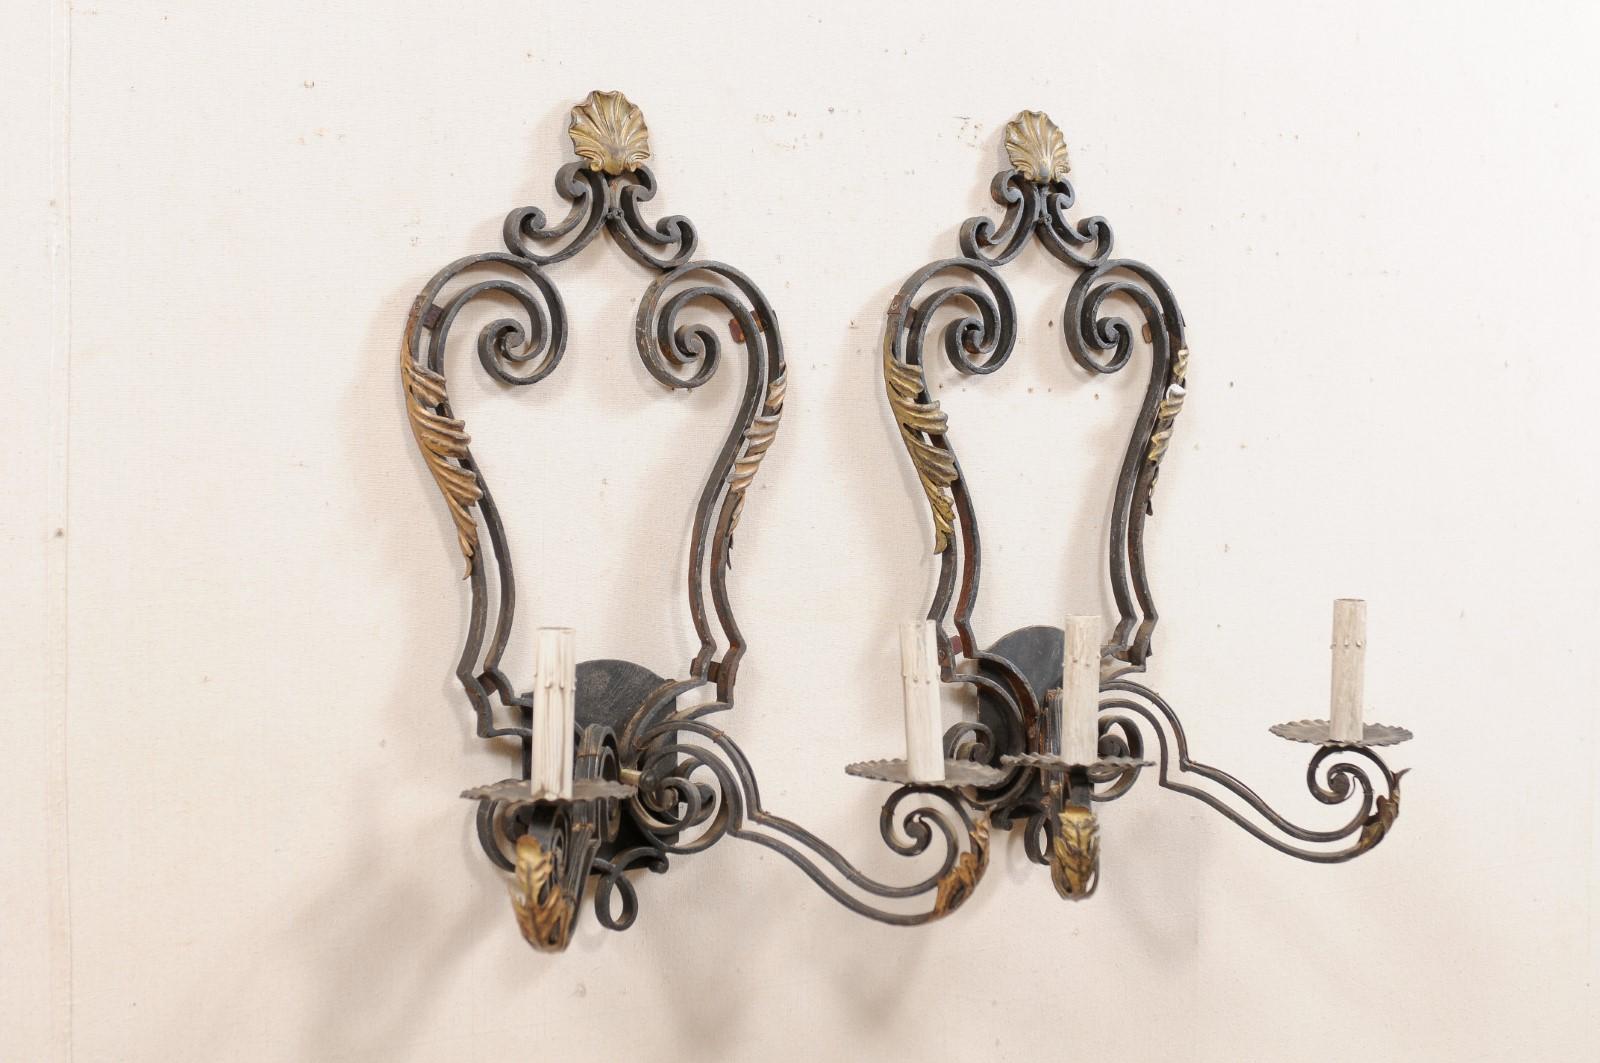 A pair of French black iron two-light sconces with gold accents from the mid-20th century. This pair of vintage French scones each have a pair of scrolling arms projecting outward, adorn with gold tone acanthus leaves, each terminate into ruffled